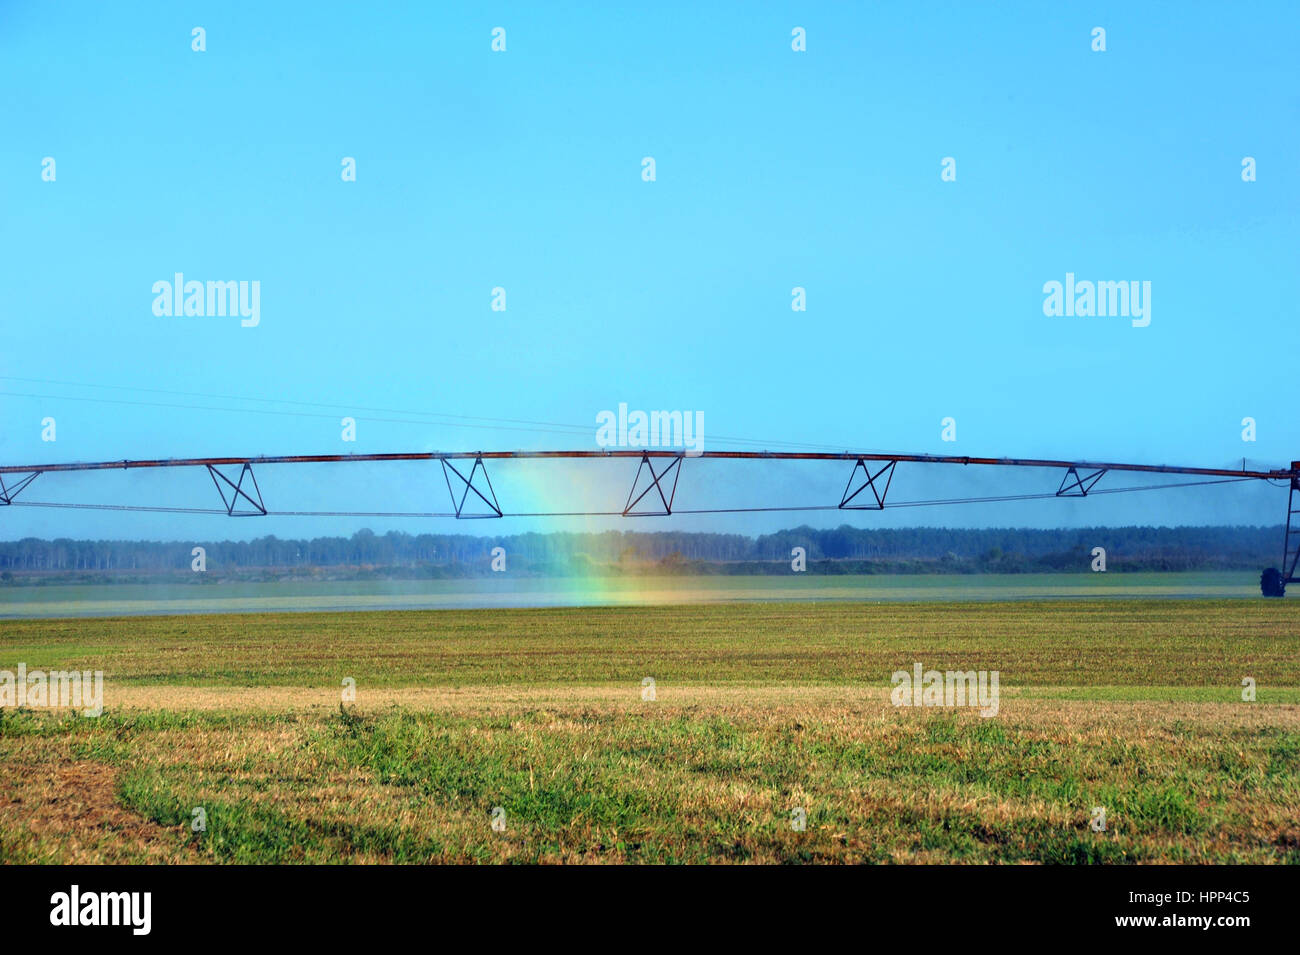 Rainbow forms in irrigation system in field in Southern Arkansas.  Rainbow could symbolize hope for the future of agriculture. Stock Photo